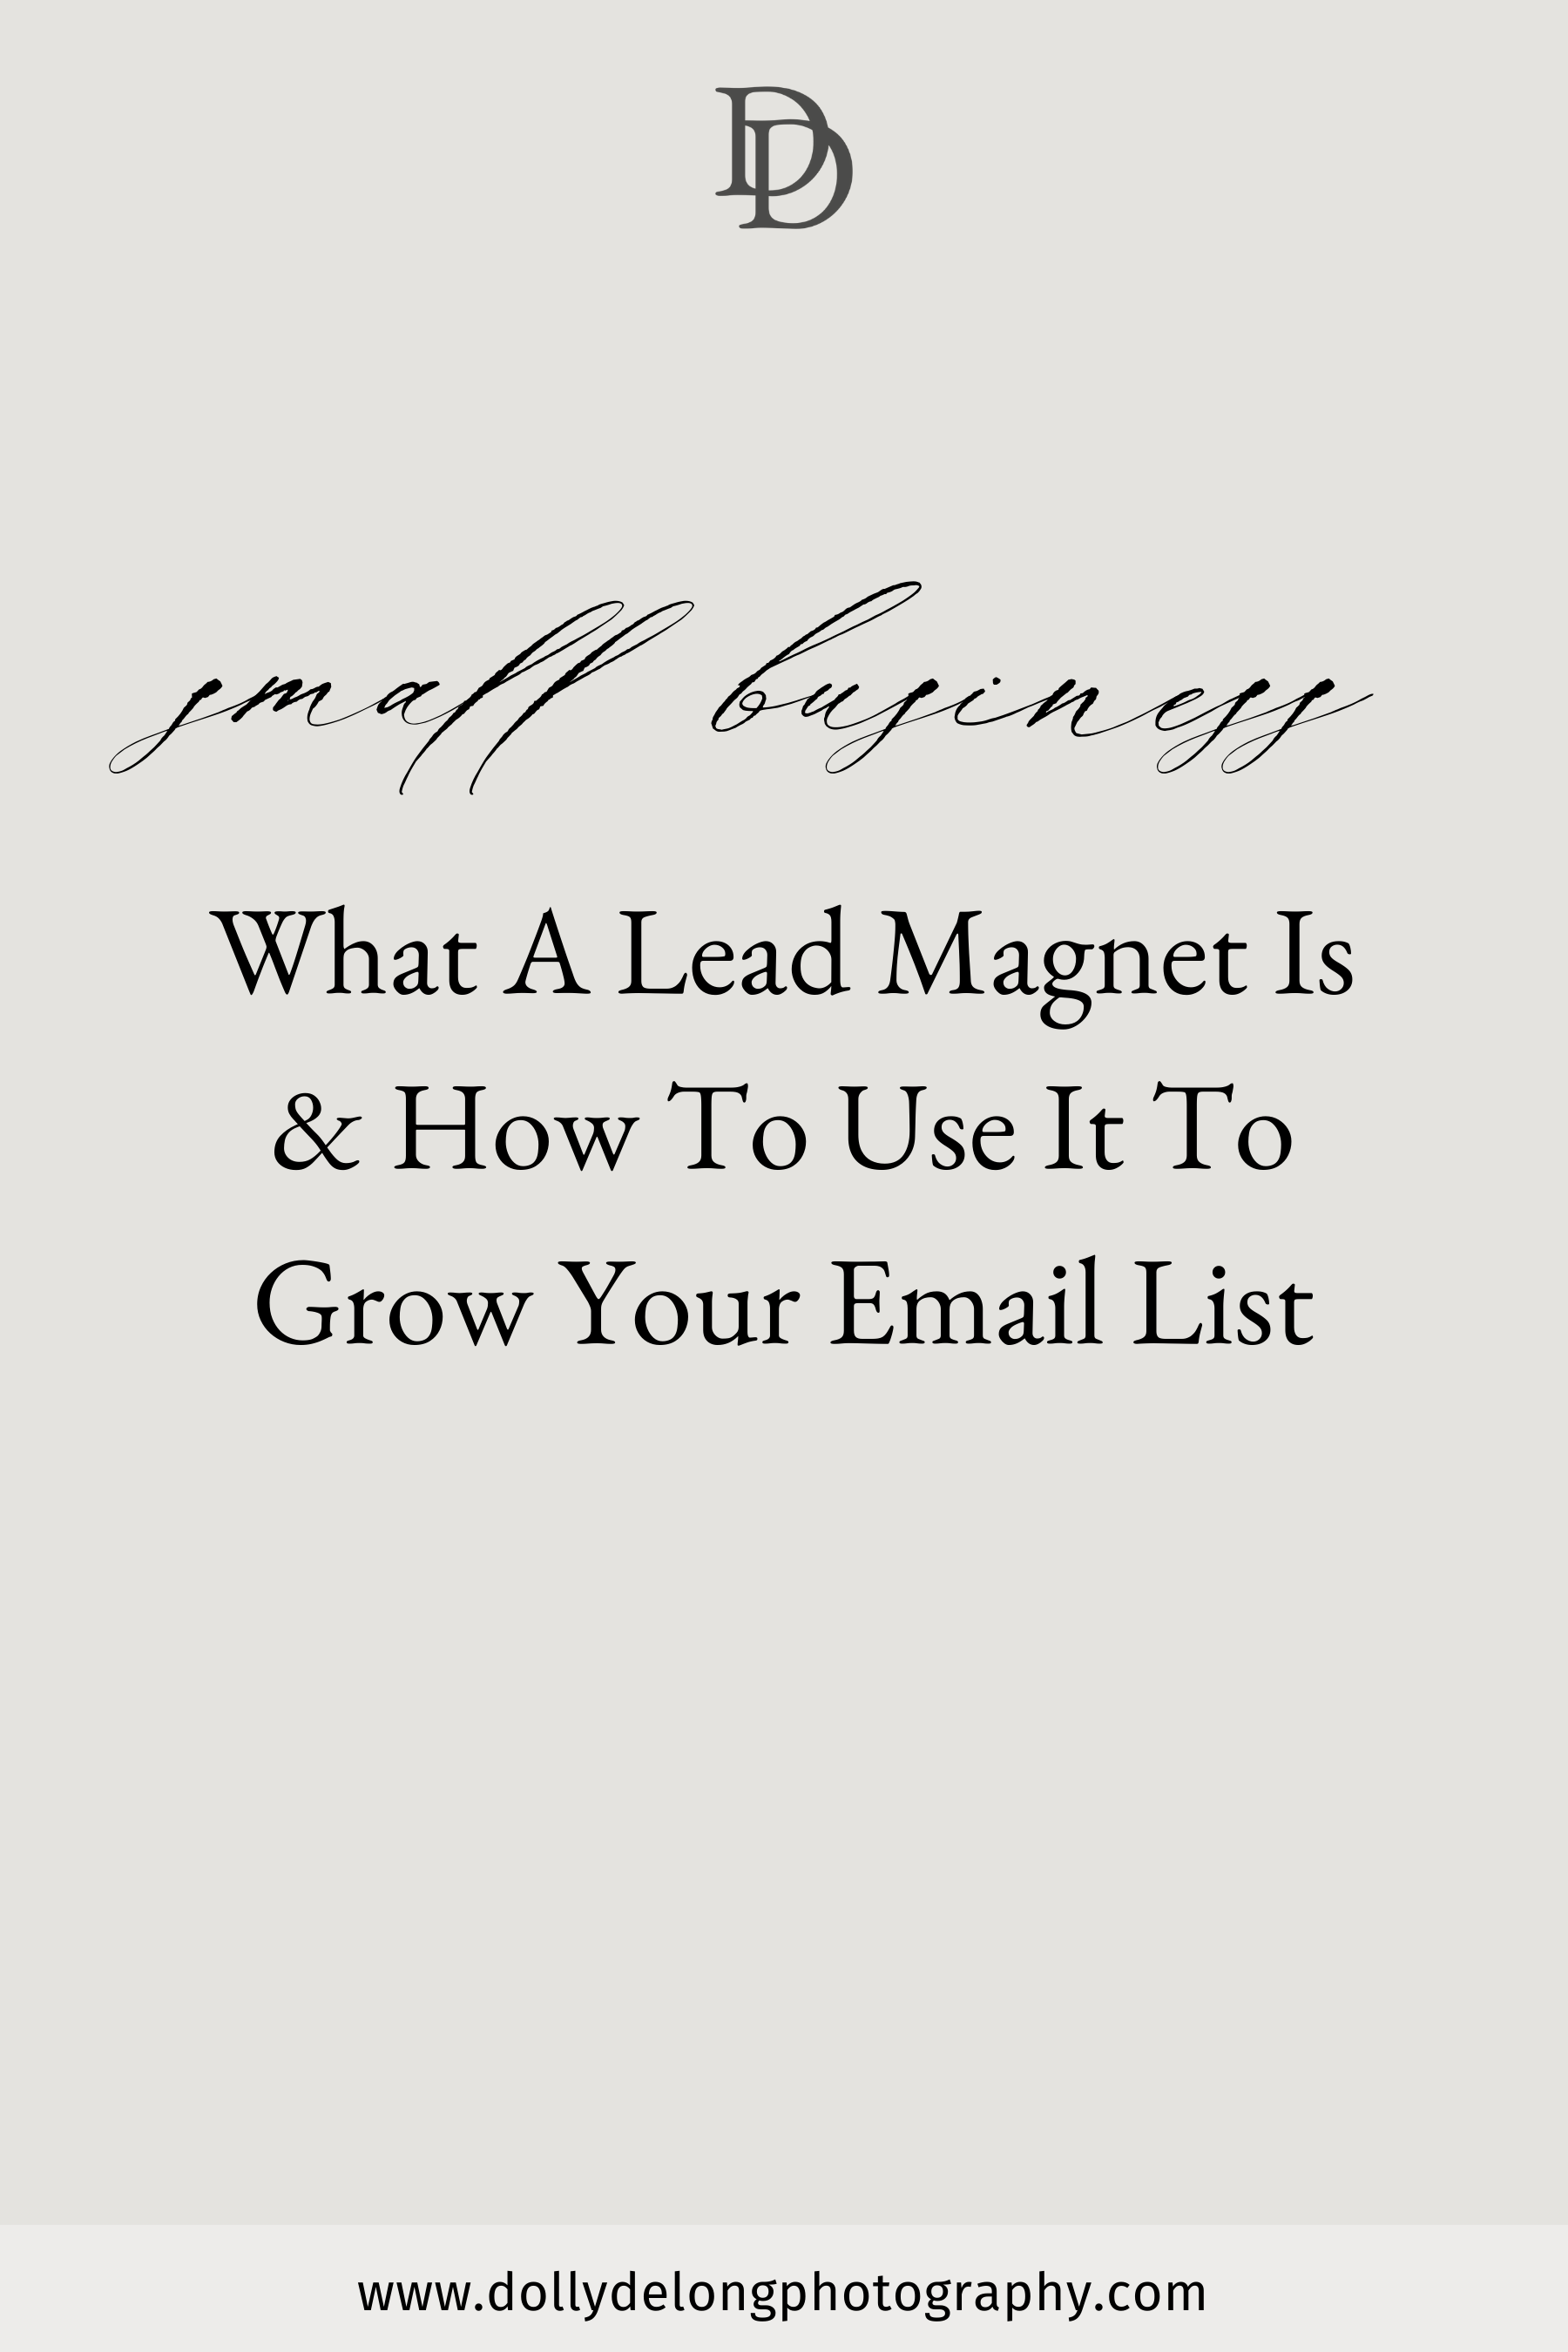 What A Lead Magnet Is & How To Use It To Grow Your Email List by Dolly DeLong Photography Nashville Branding Photographer